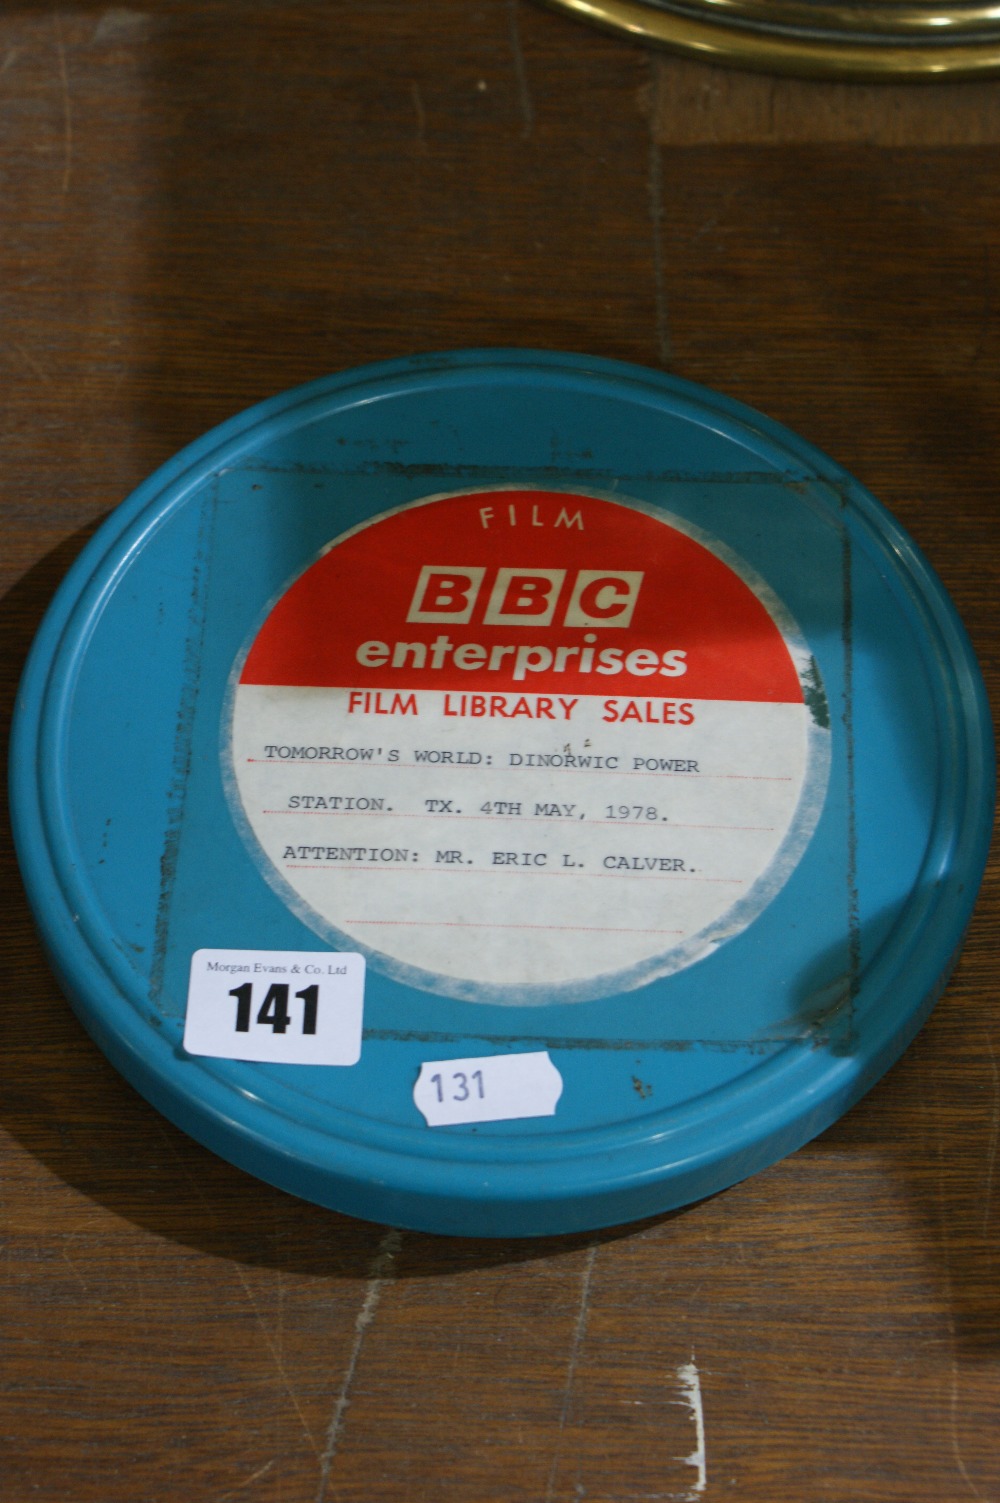 A Reel Of BBC Film For The Tomorrows World Programme Filmed At Dinorwig Power Station, May 1978